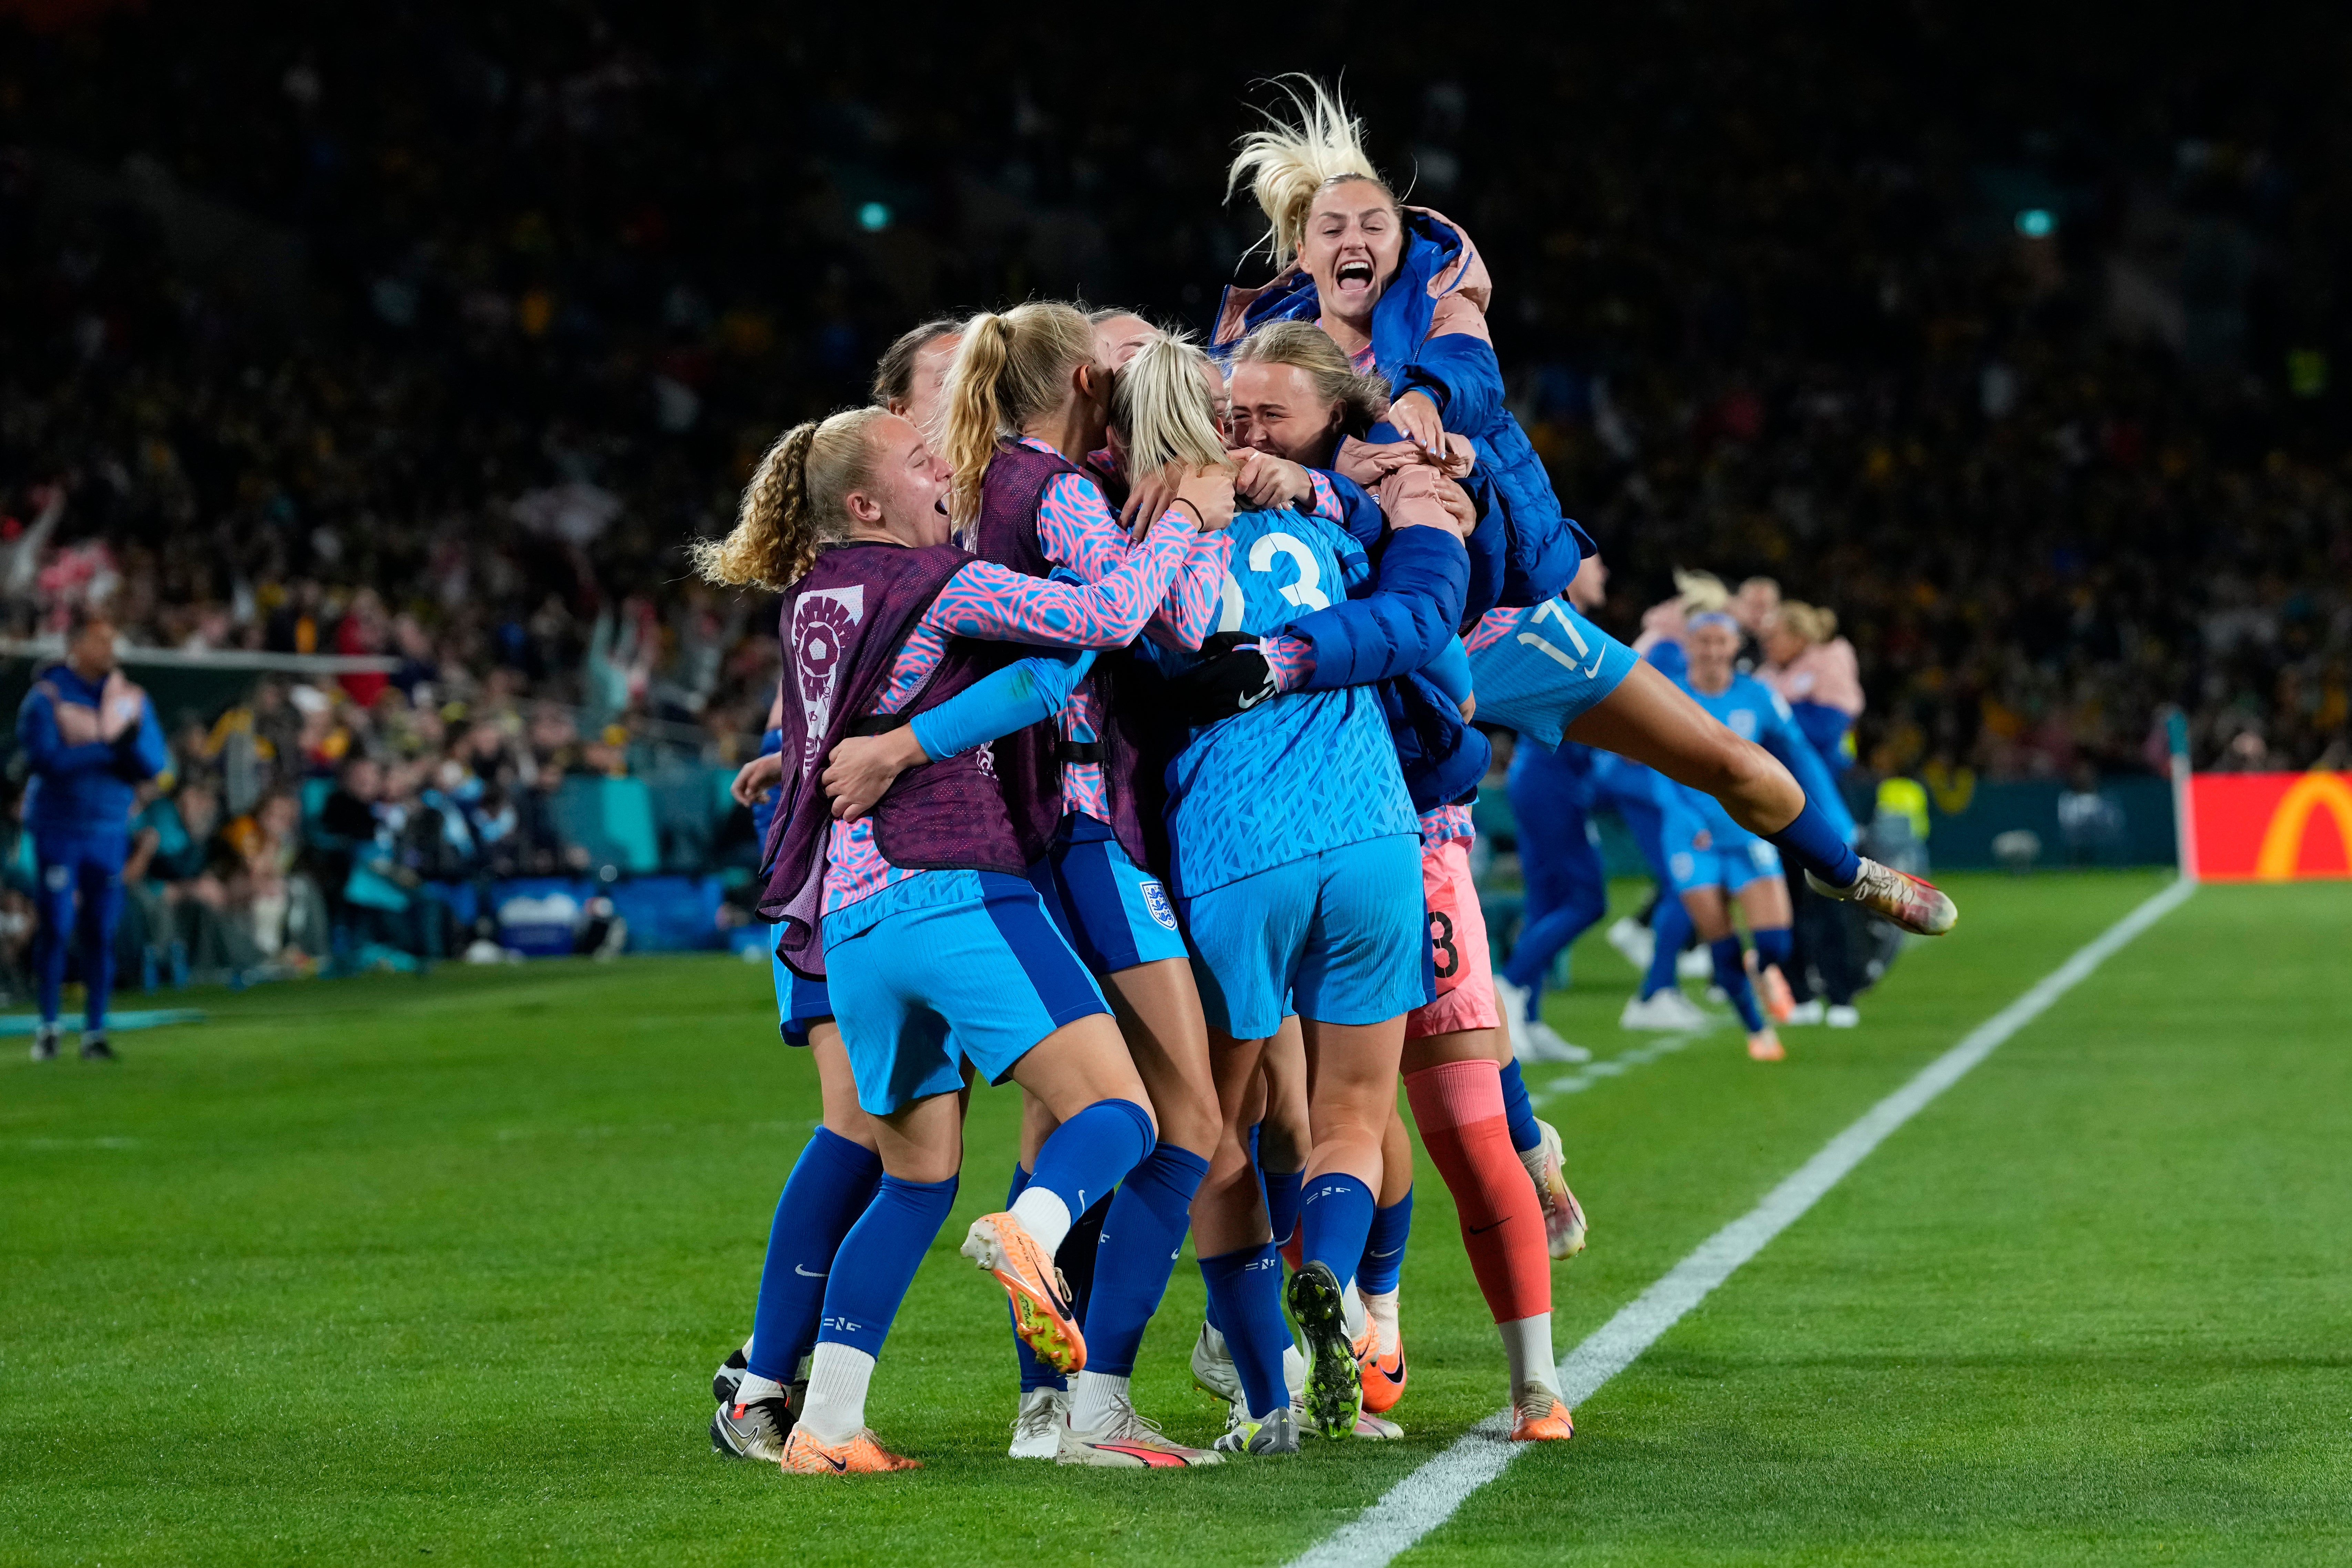 England stands to benefit from ‘ideal’ weather conditions when they play Spain in the Women’s World Cup final in Sydney, Australia